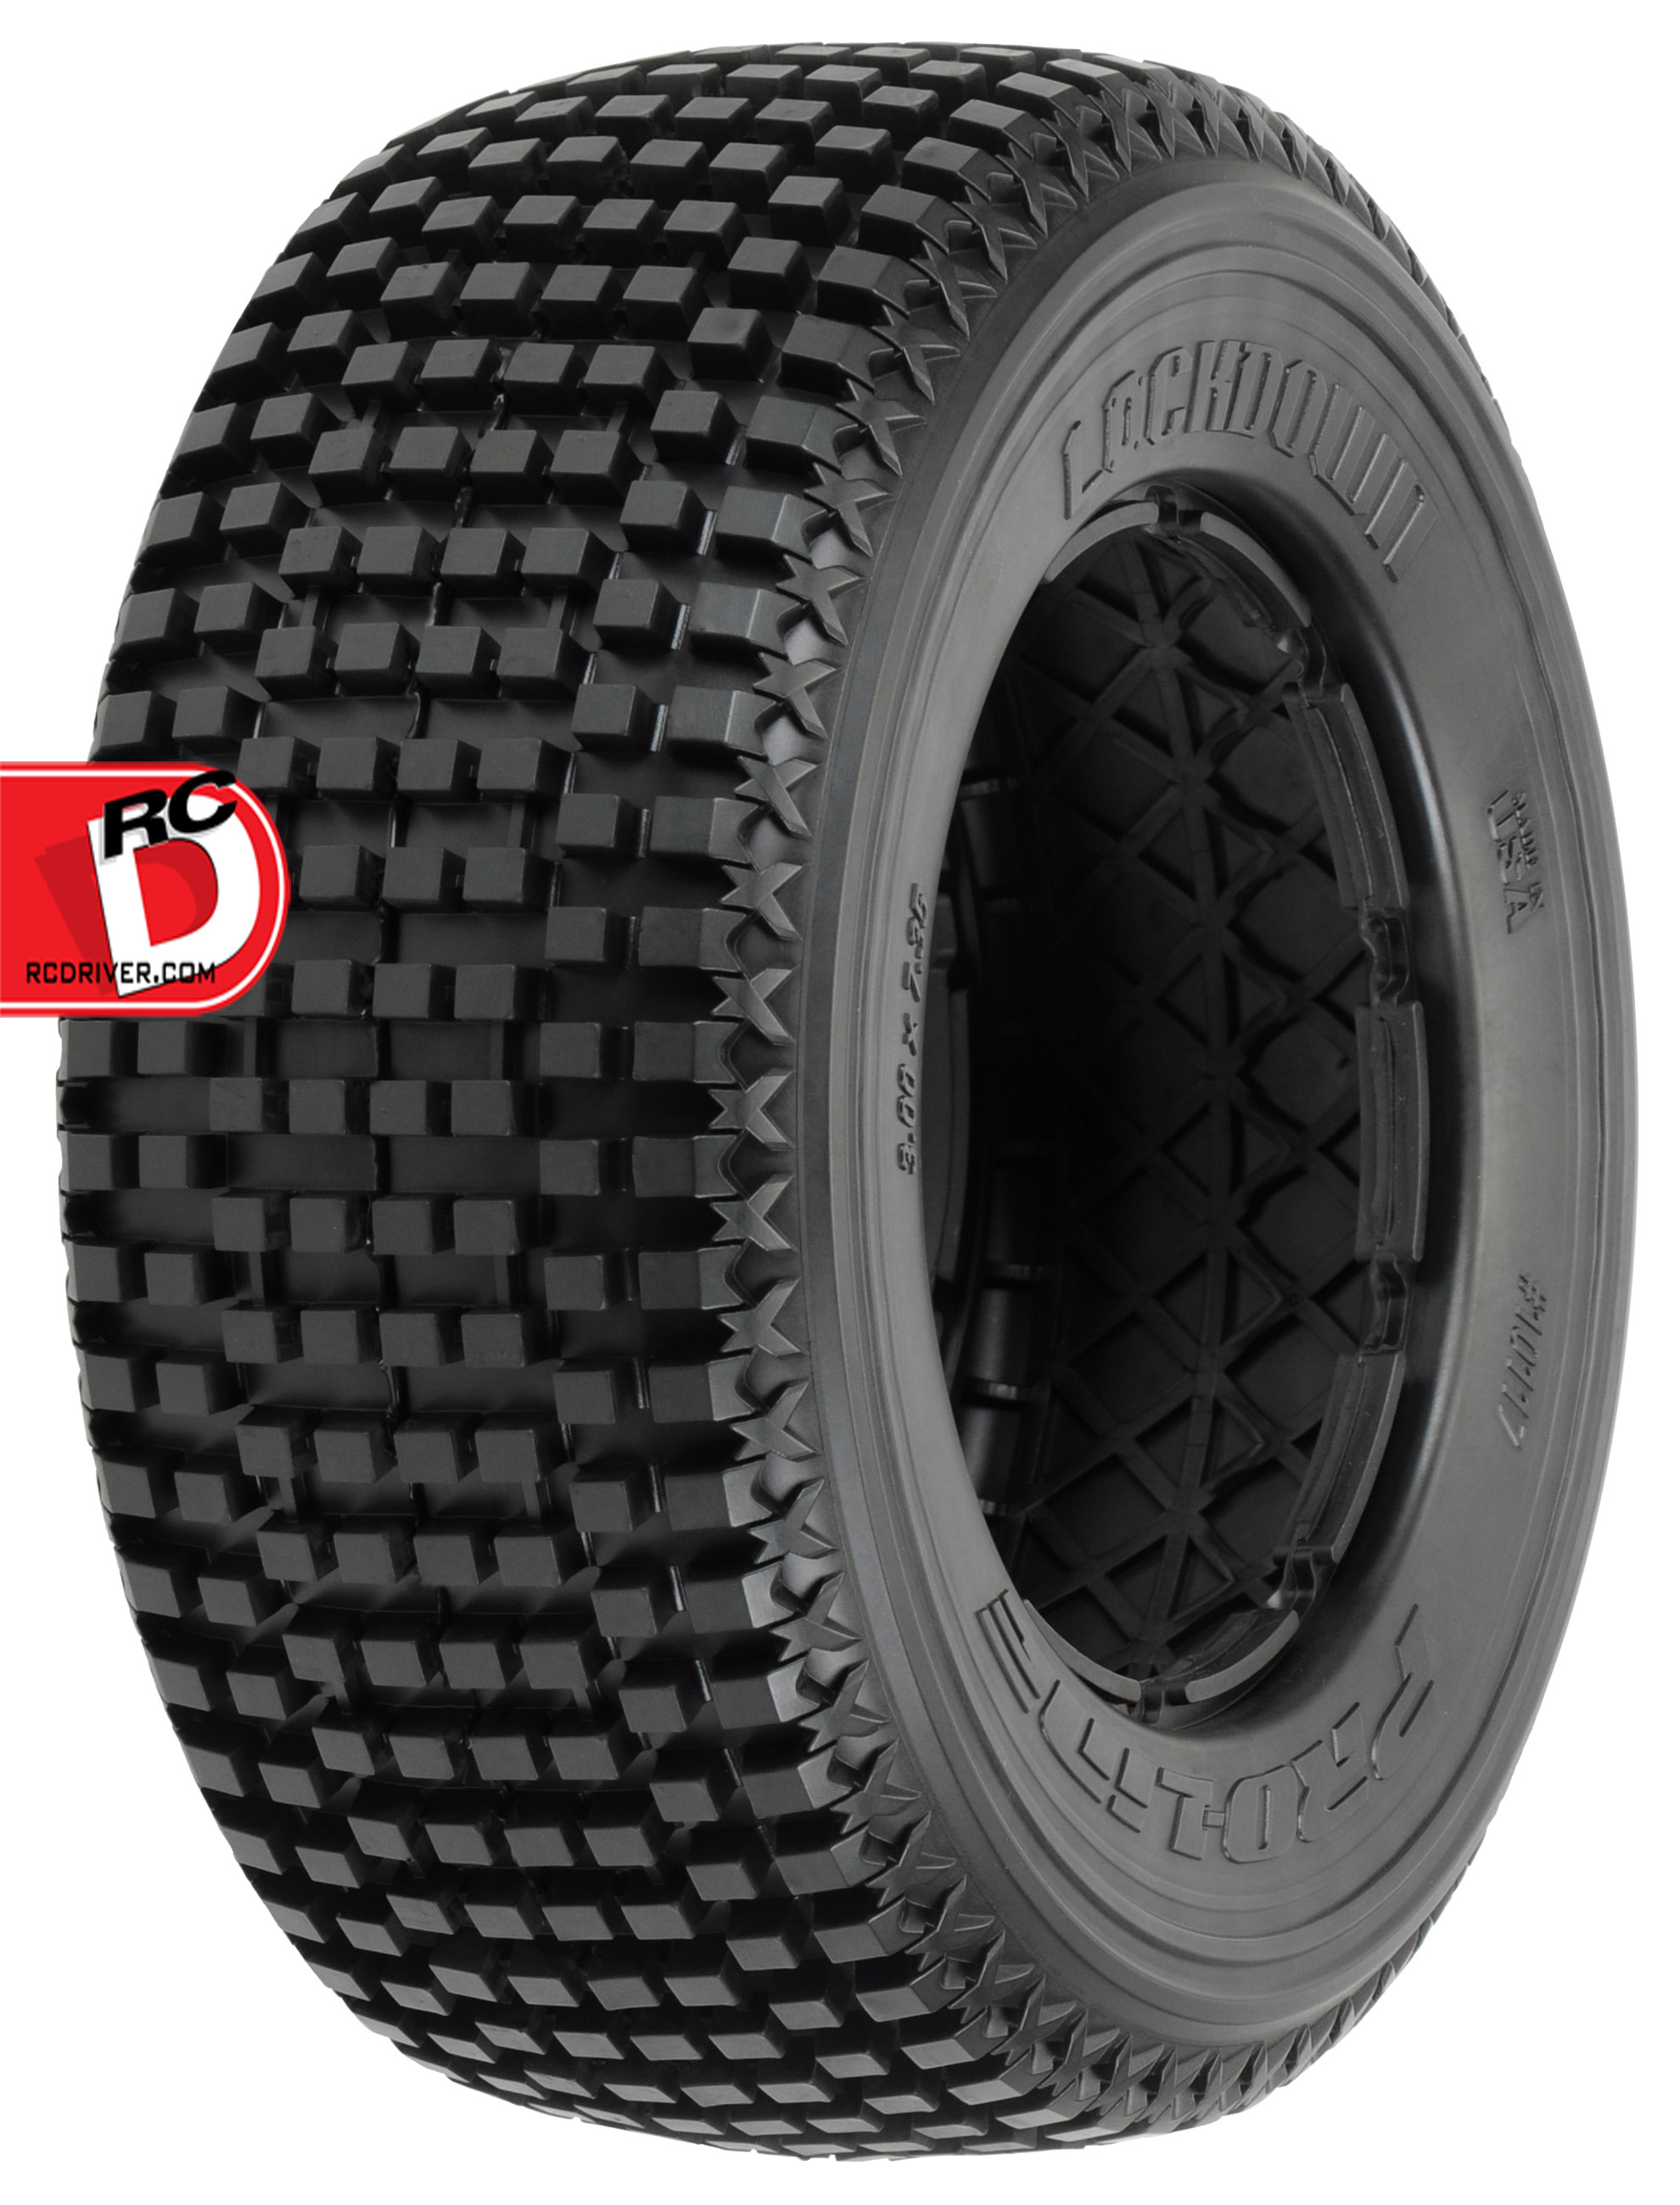 Pro-Line Racing - LockDown XTR Tires for the Baja 5SC or Losi 5ive-T copy